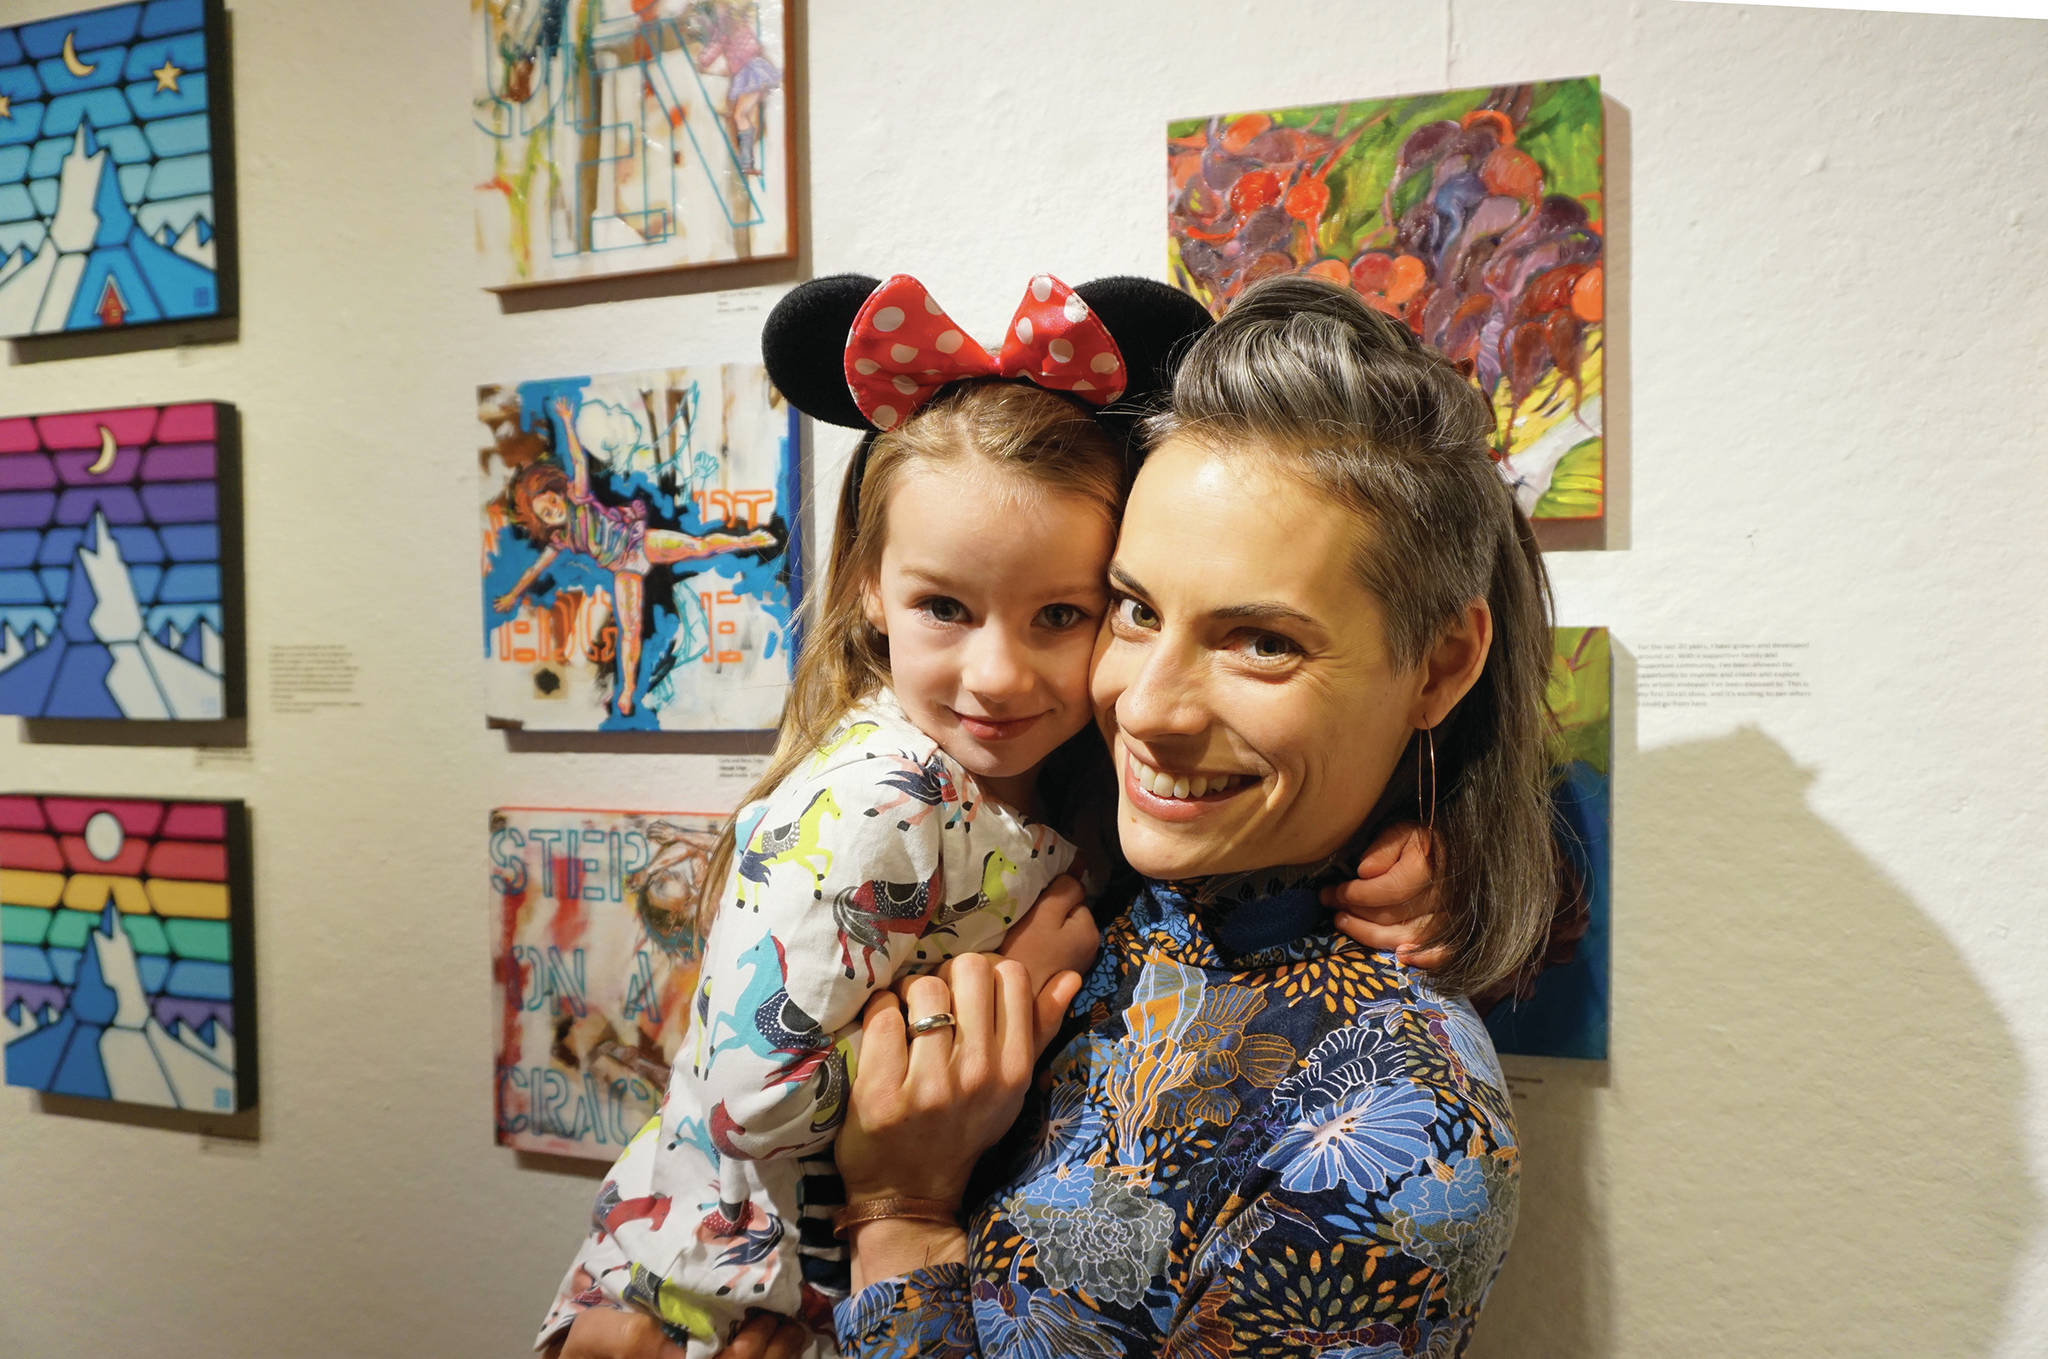 Carla Klinker Cope and her daughter, Nova, pose next to their paintings at left at the Nov, 8, 2019, opening of the 10x10 show at Bunnell Street Arts Center. Nova painted the background elements to the paintings and her mother added to that. (Photo by Michael Armstrong/Homer News)